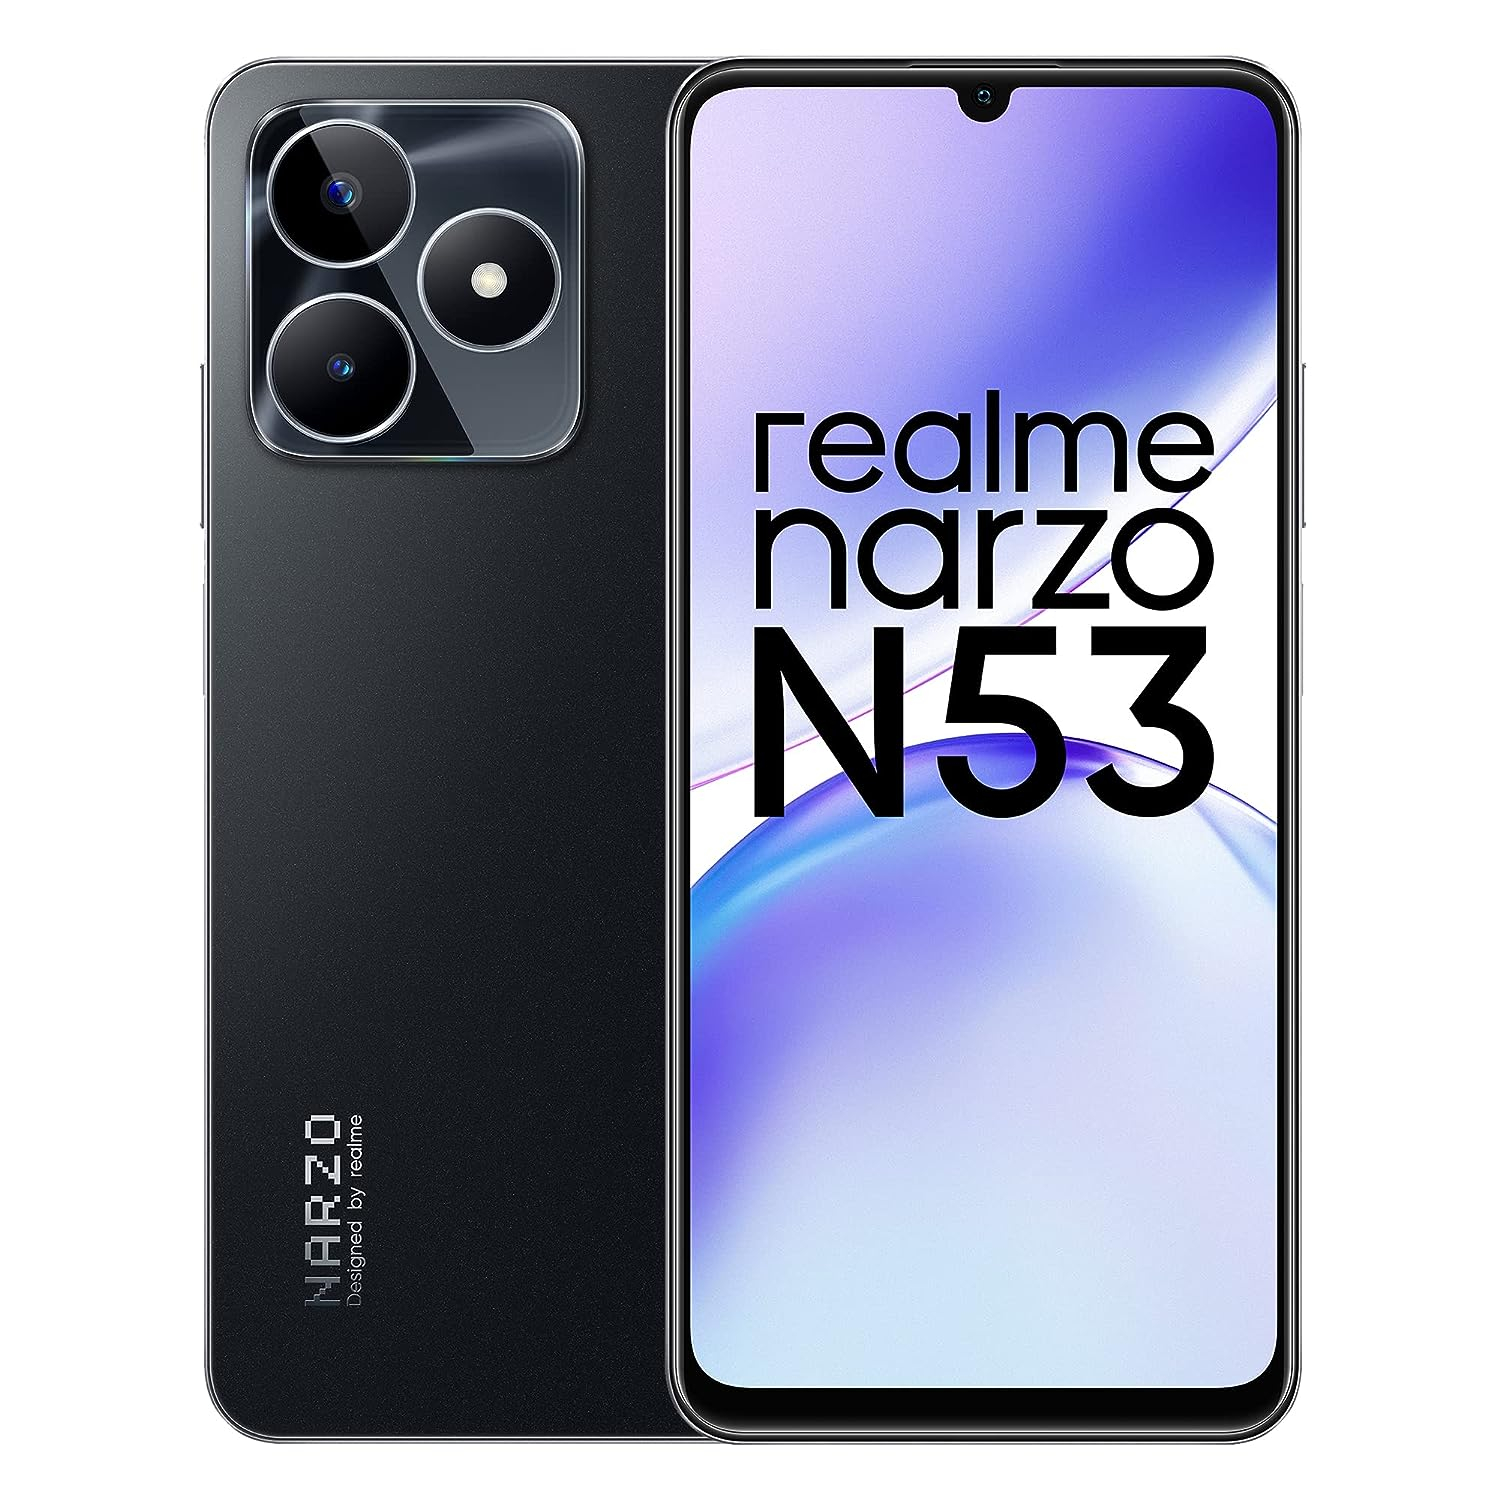 realme narzo N53 (Feather Gold, 6GB+128GB) 33W Segment Fastest Charging | Slimmest Phone in Segment | 90 Hz Smooth Display